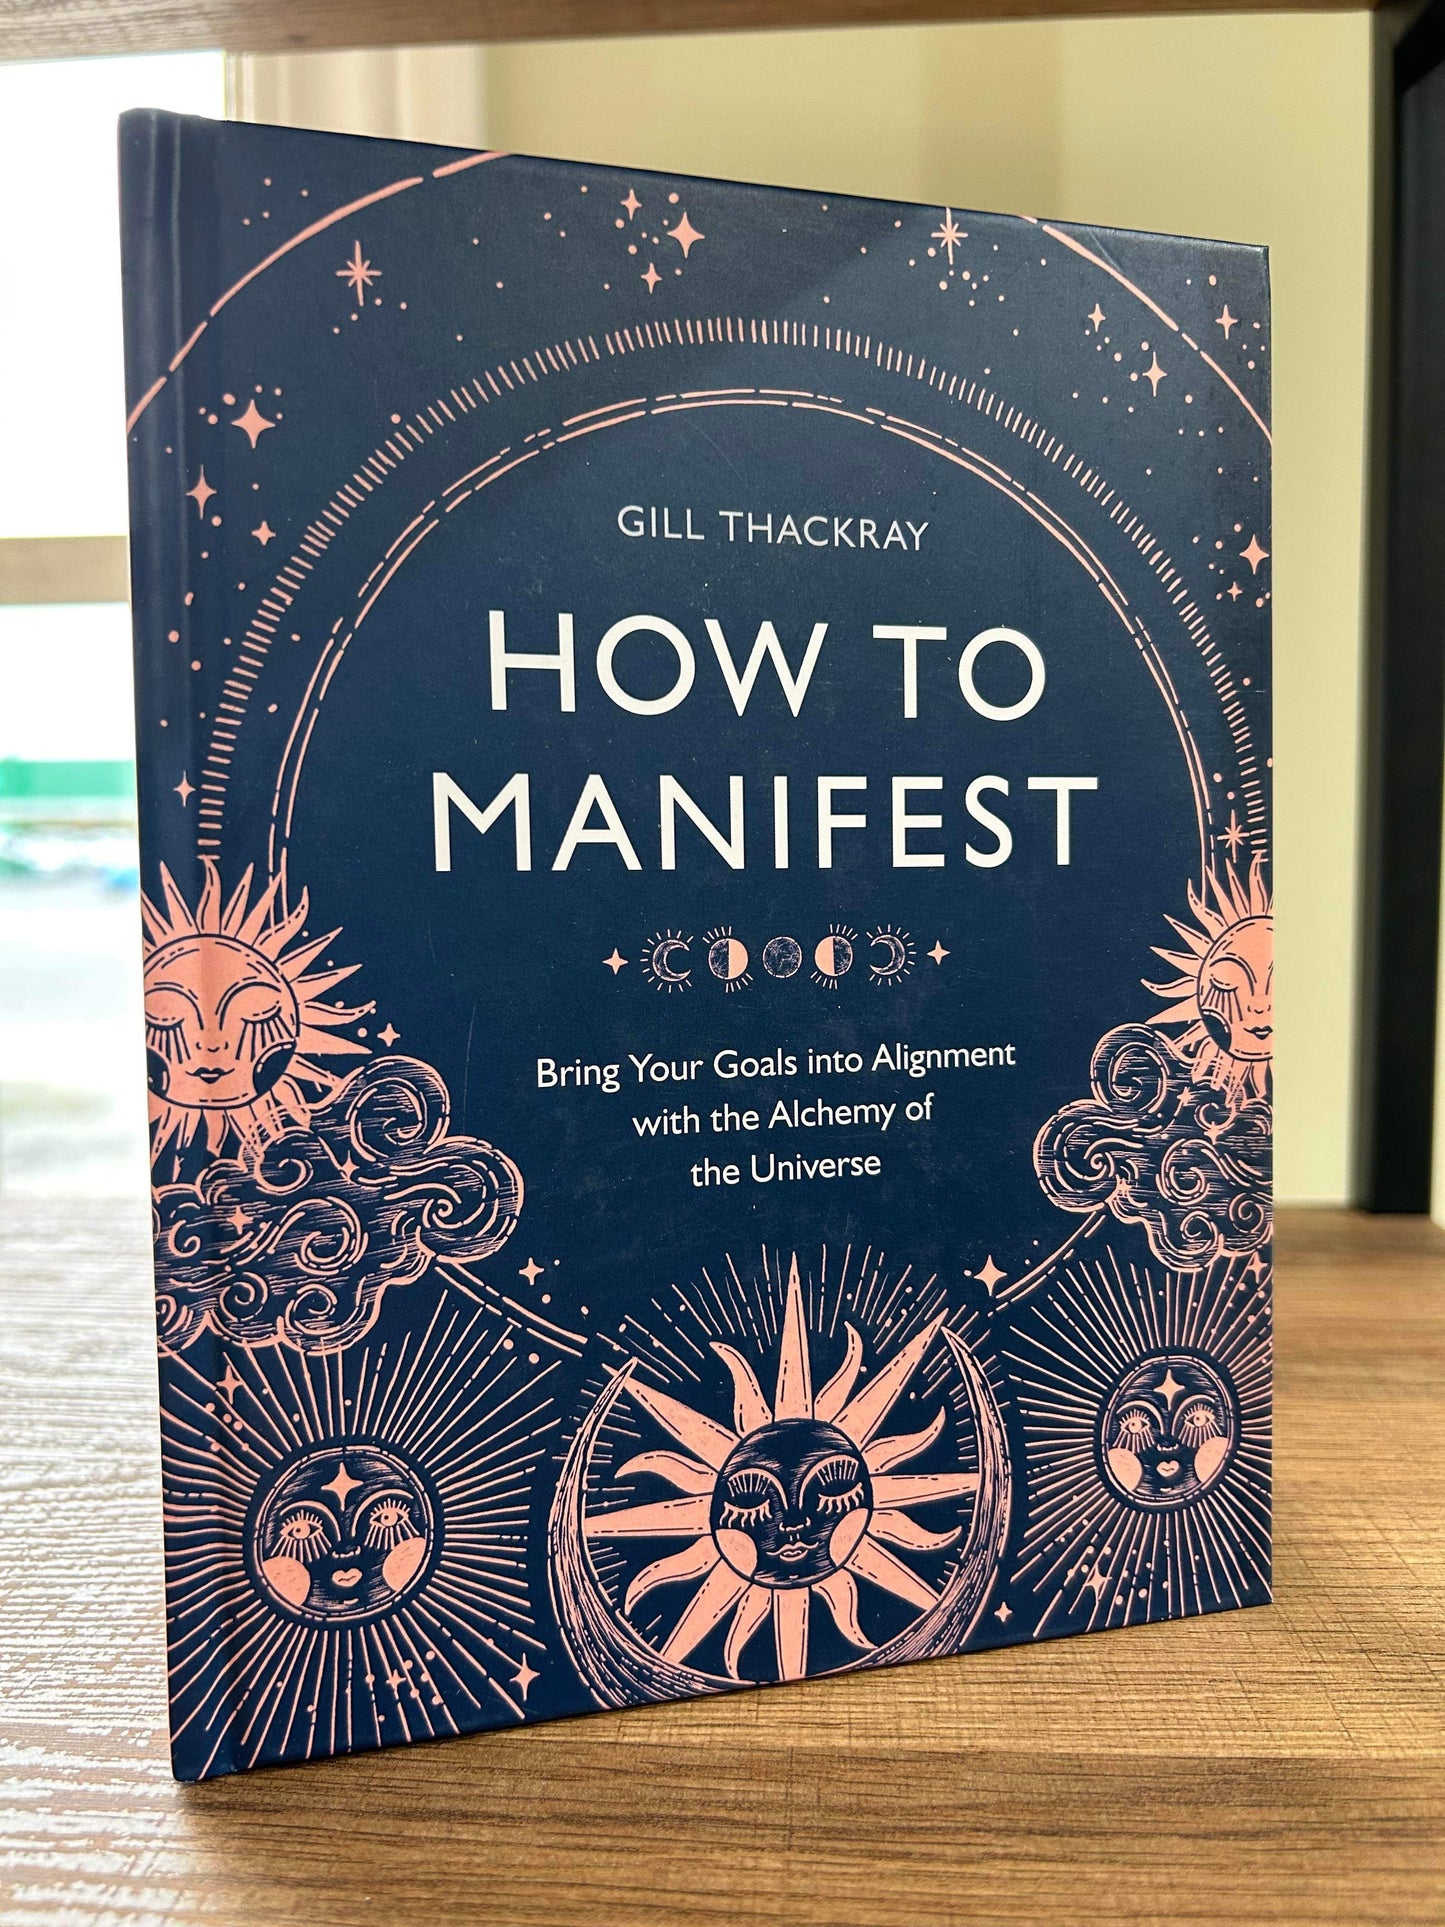 How to Manifest by Gill Thackray